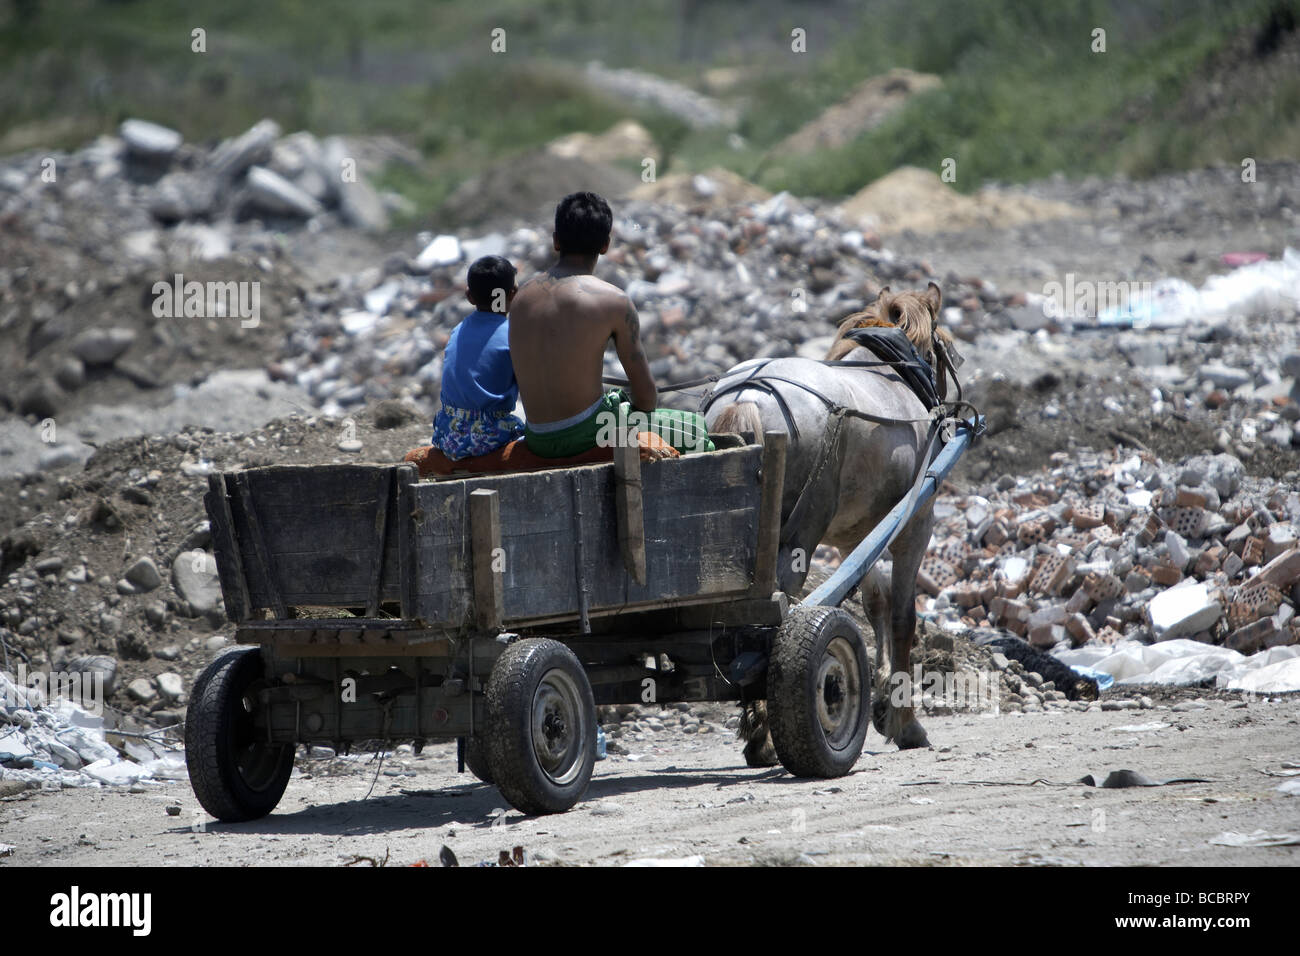 Adults and children scavenging for rubbish using a horse and cart Samokov Bulgaria Stock Photo